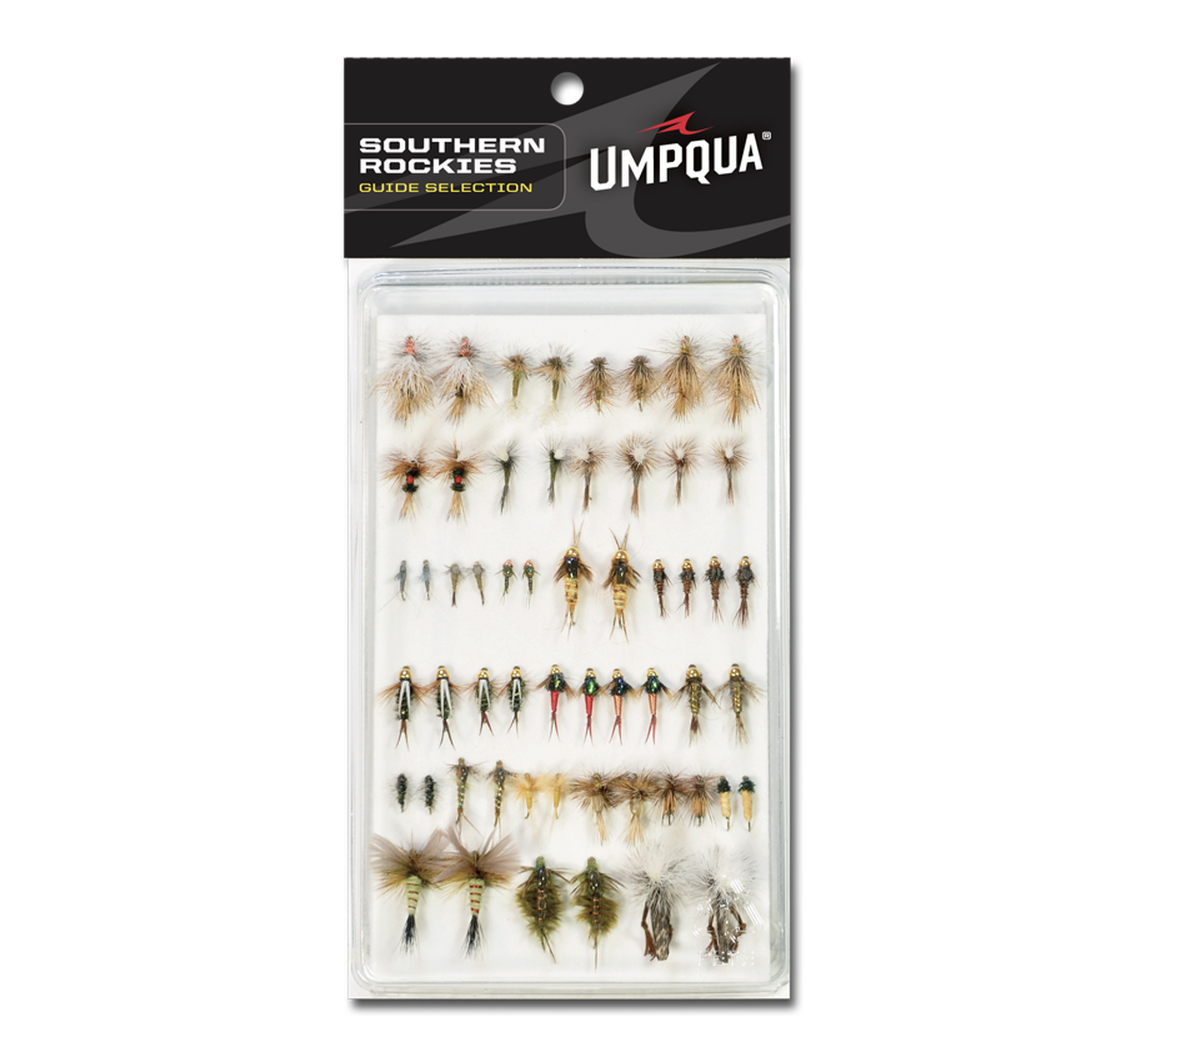 The perfect assortment of trout flies to fill your fly box for trips to colorado